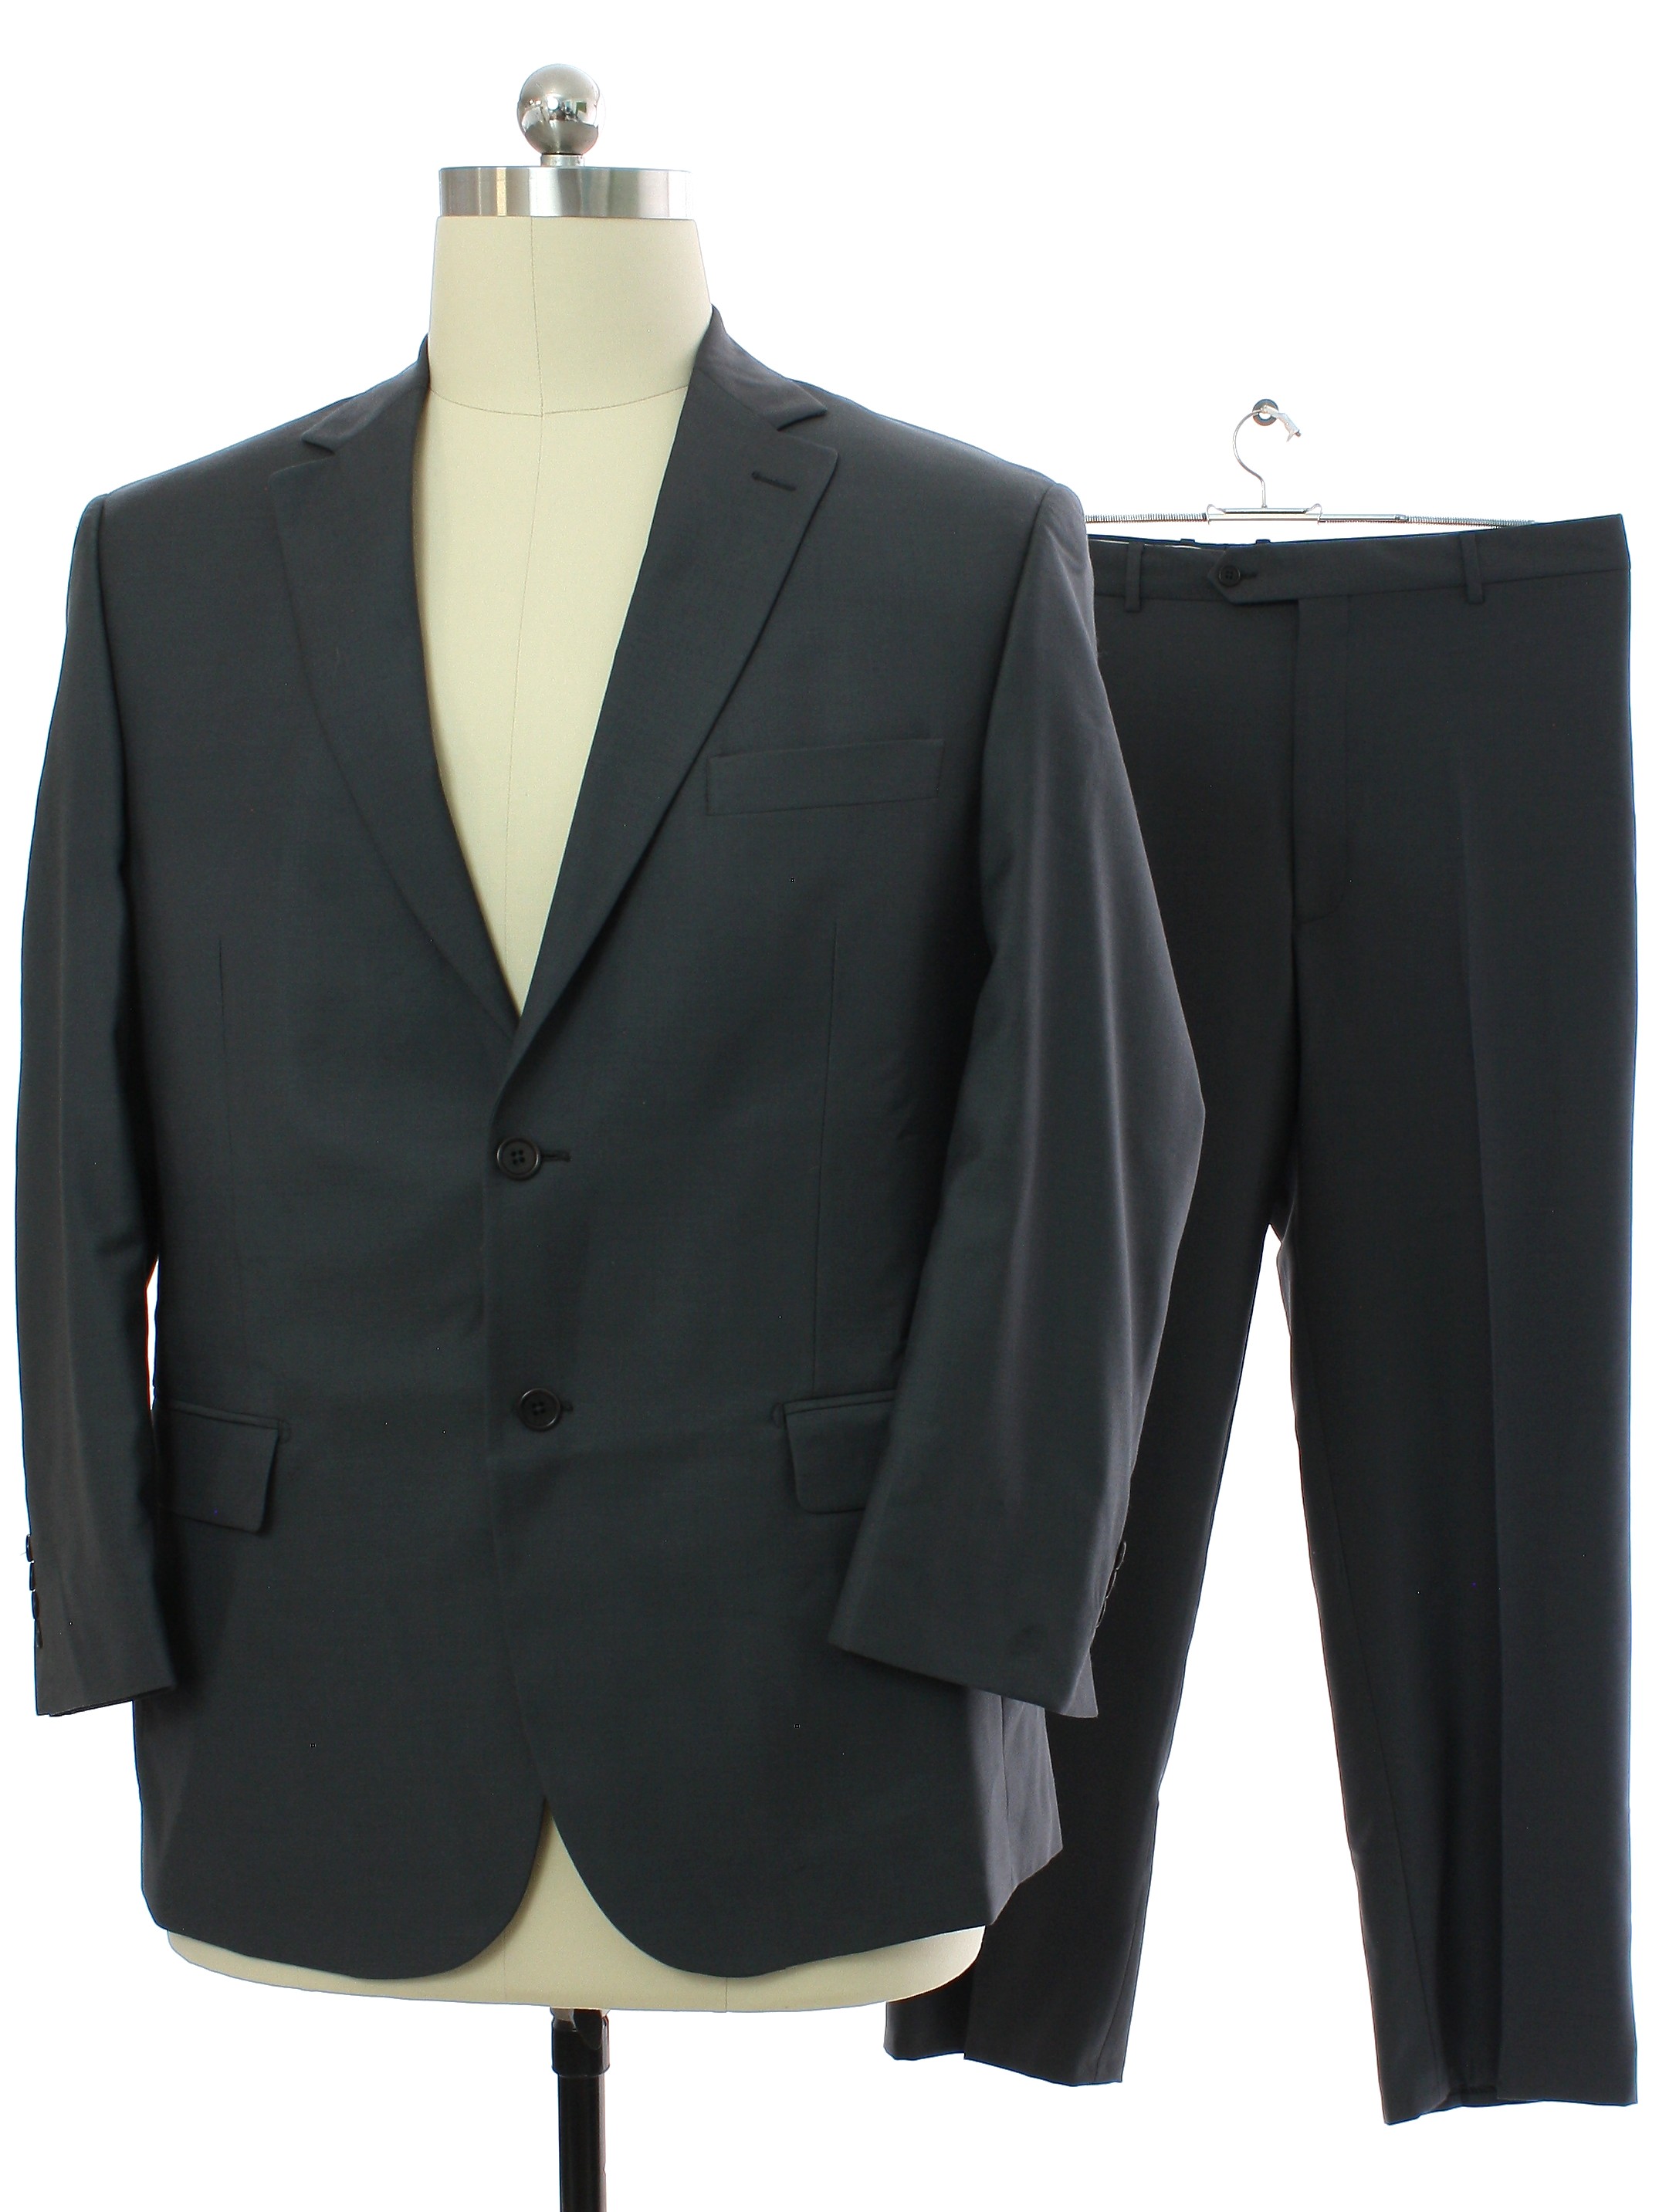 Vintage Tollegno 1900 Fabric Made in Italy Eighties Suit: 80s -Tollegno ...